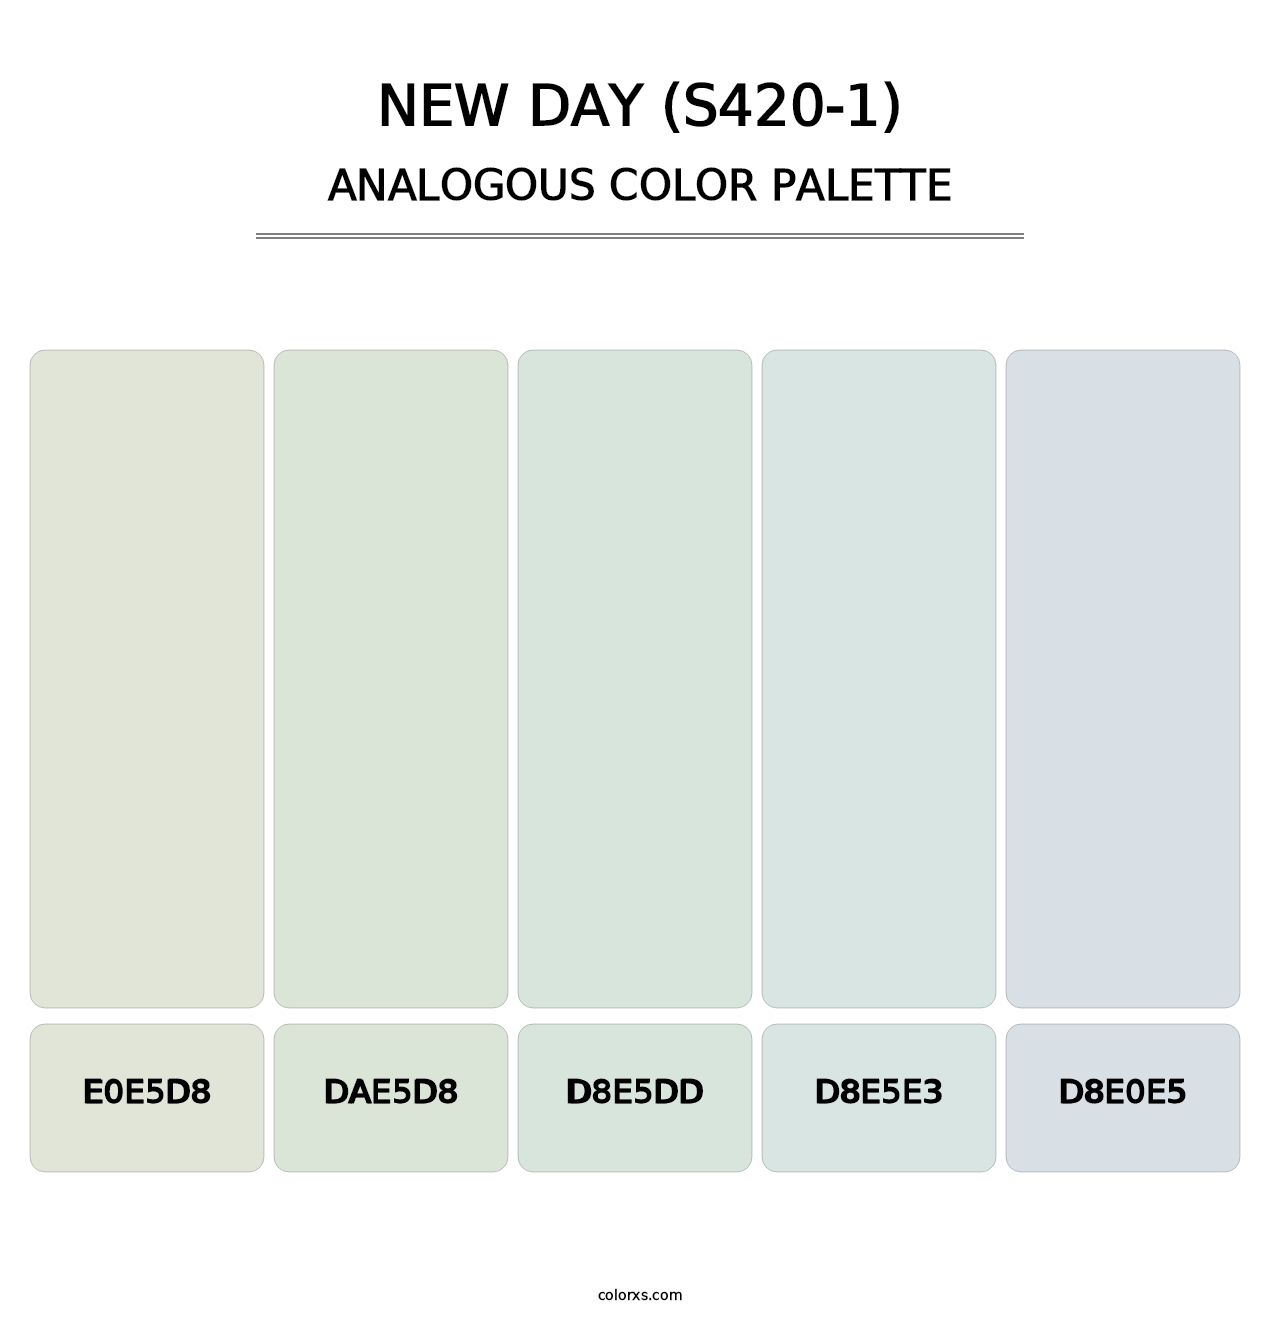 New Day (S420-1) - Analogous Color Palette